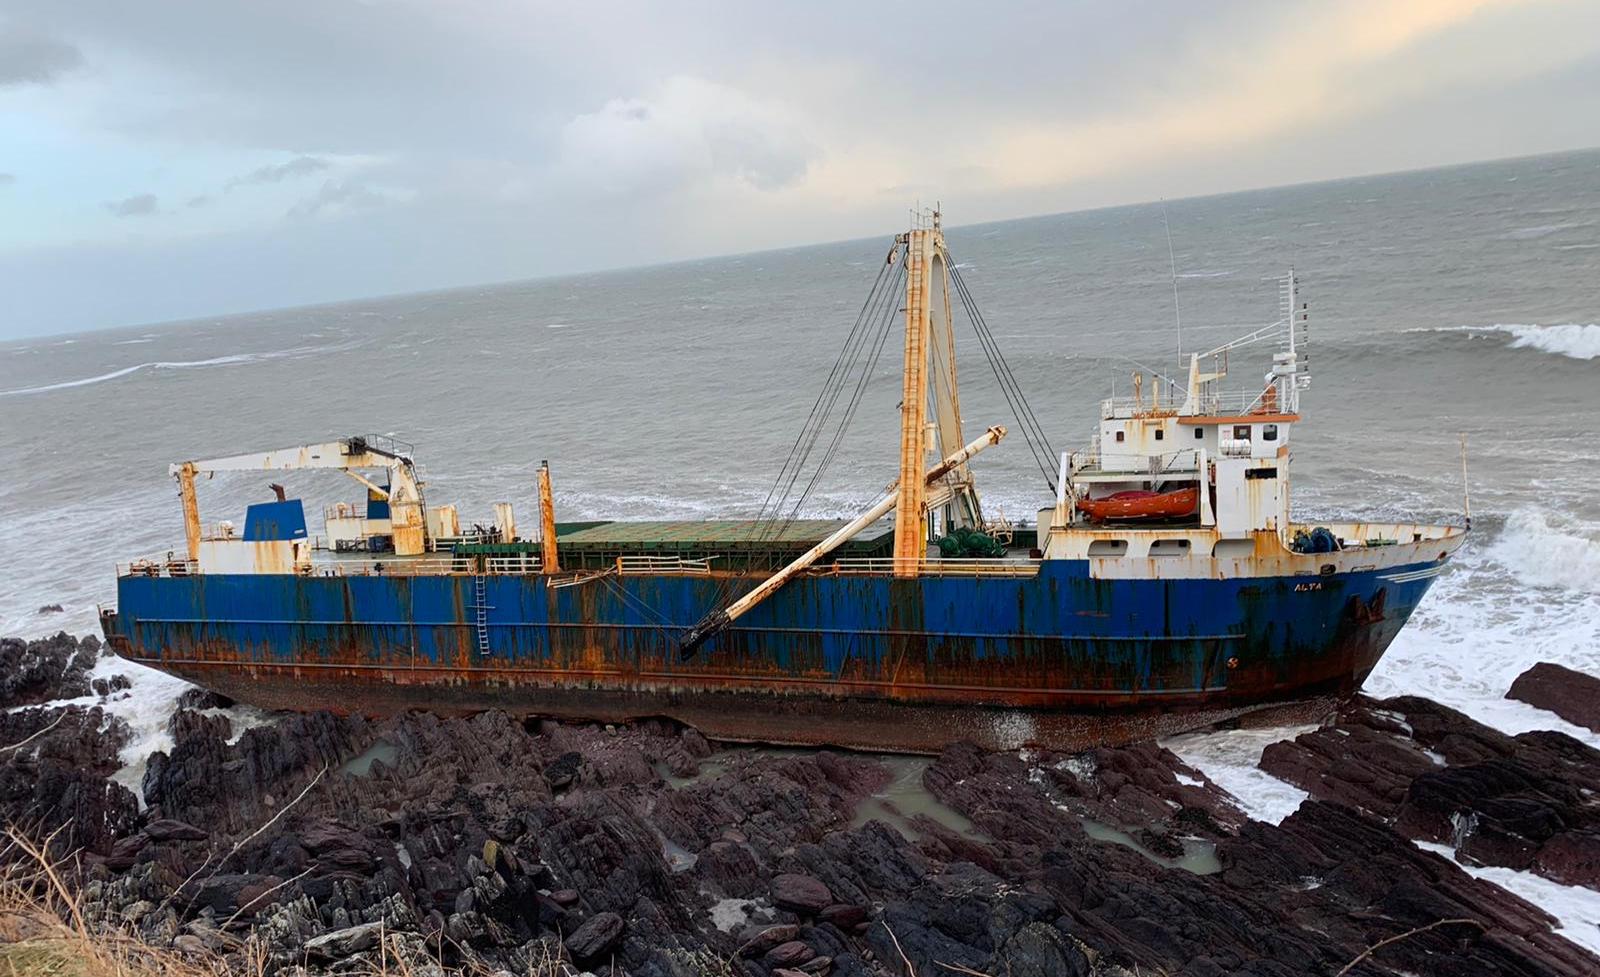 One Year After Grounding, Abandoned Cargo Ship Continues to Pose a Hazard in Ireland